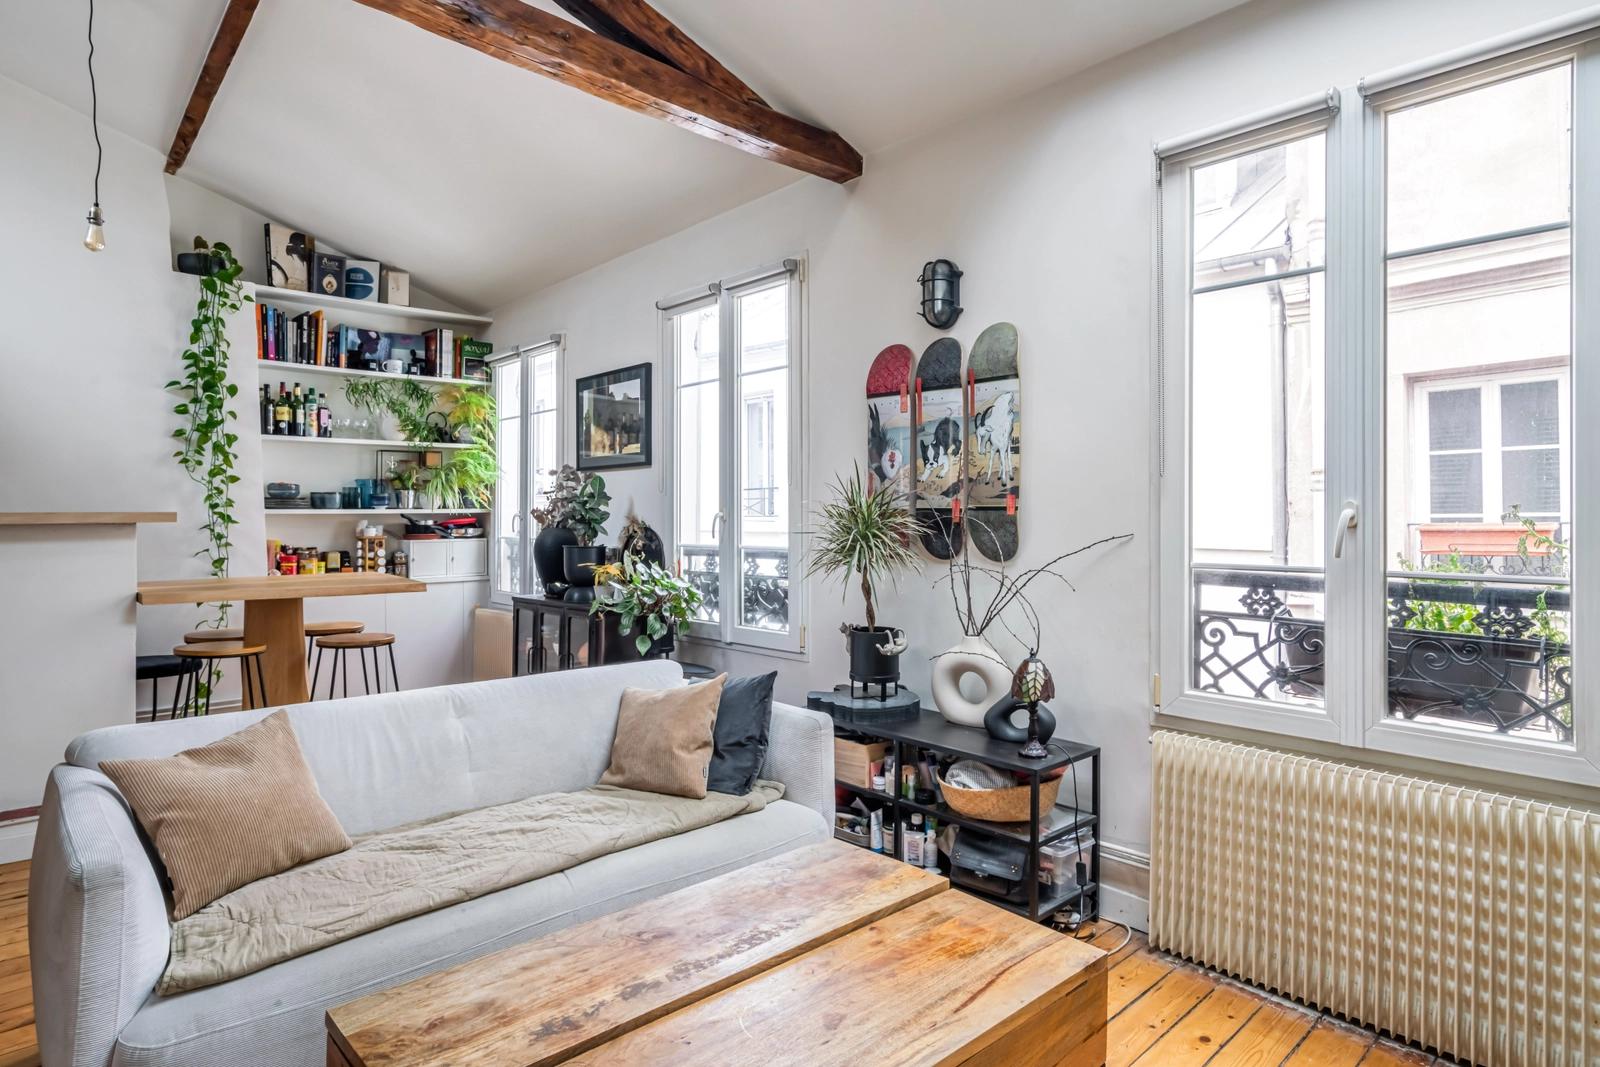 Space Magnificent apartment with beams Pigalle - 0